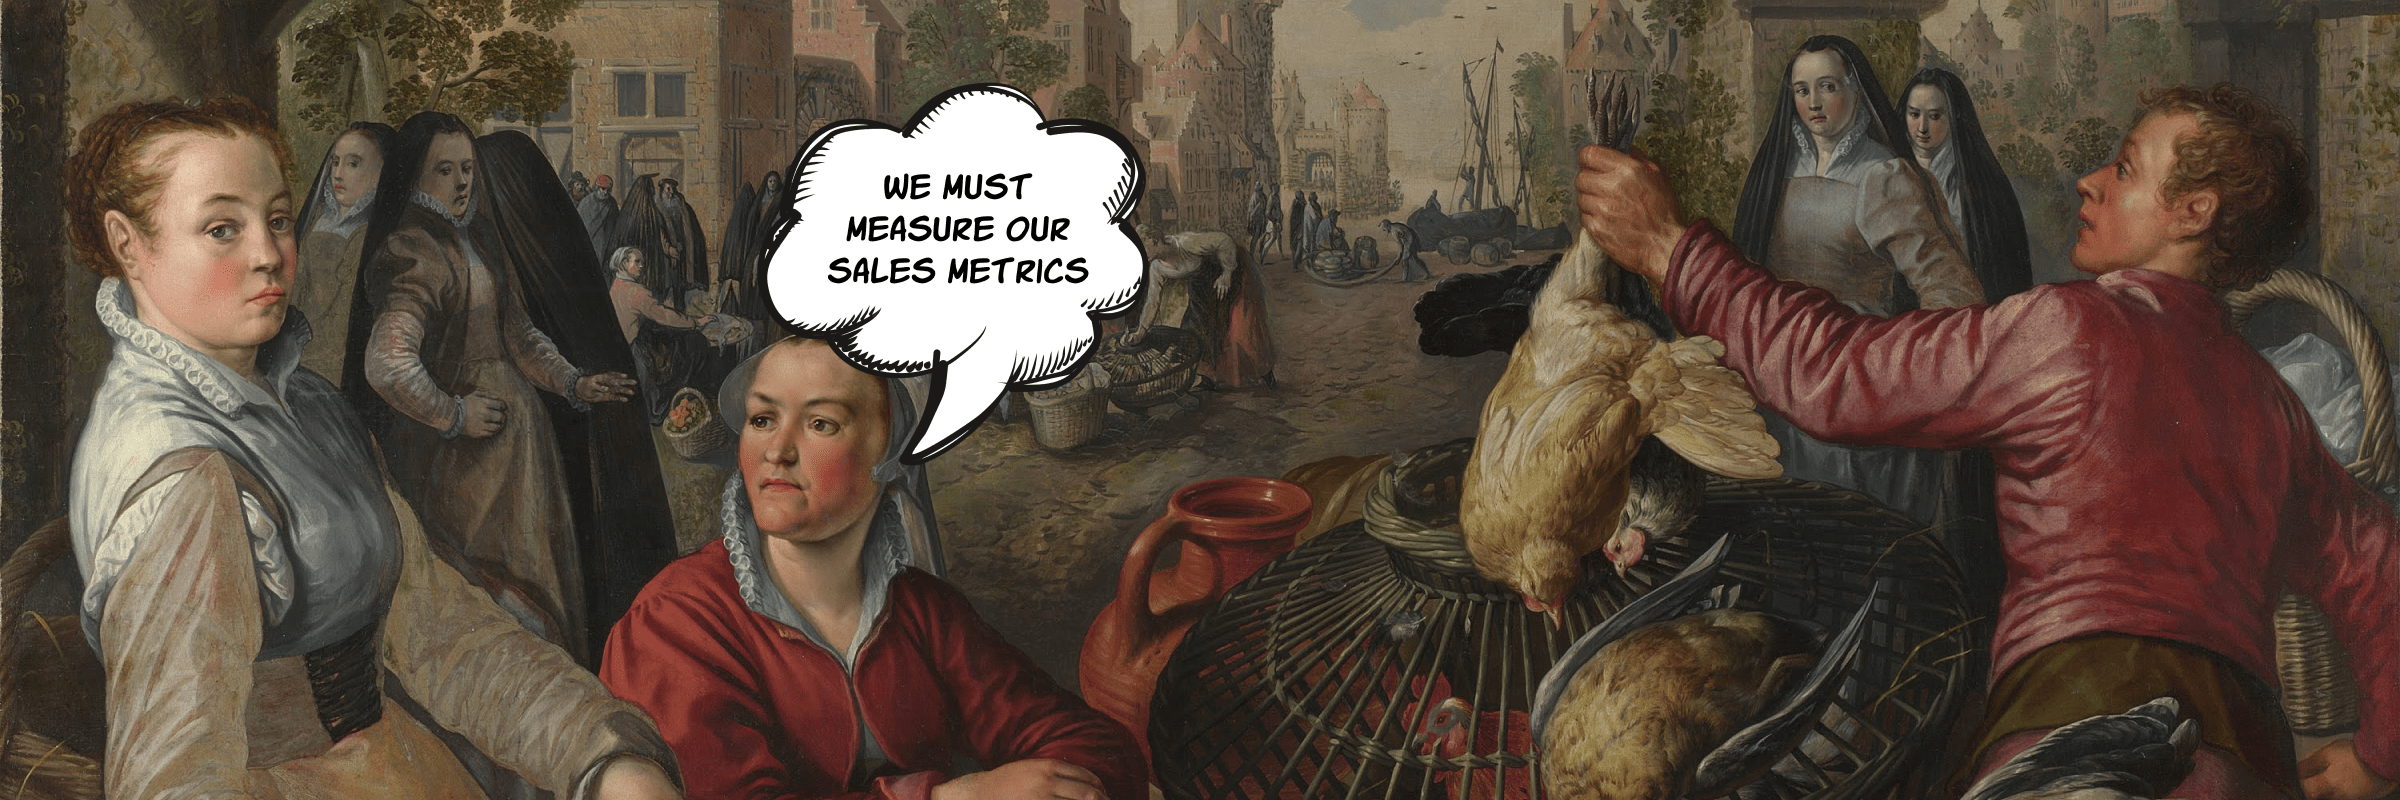 10 Important Sales Metrics for a Business to Evaluate and Rock It